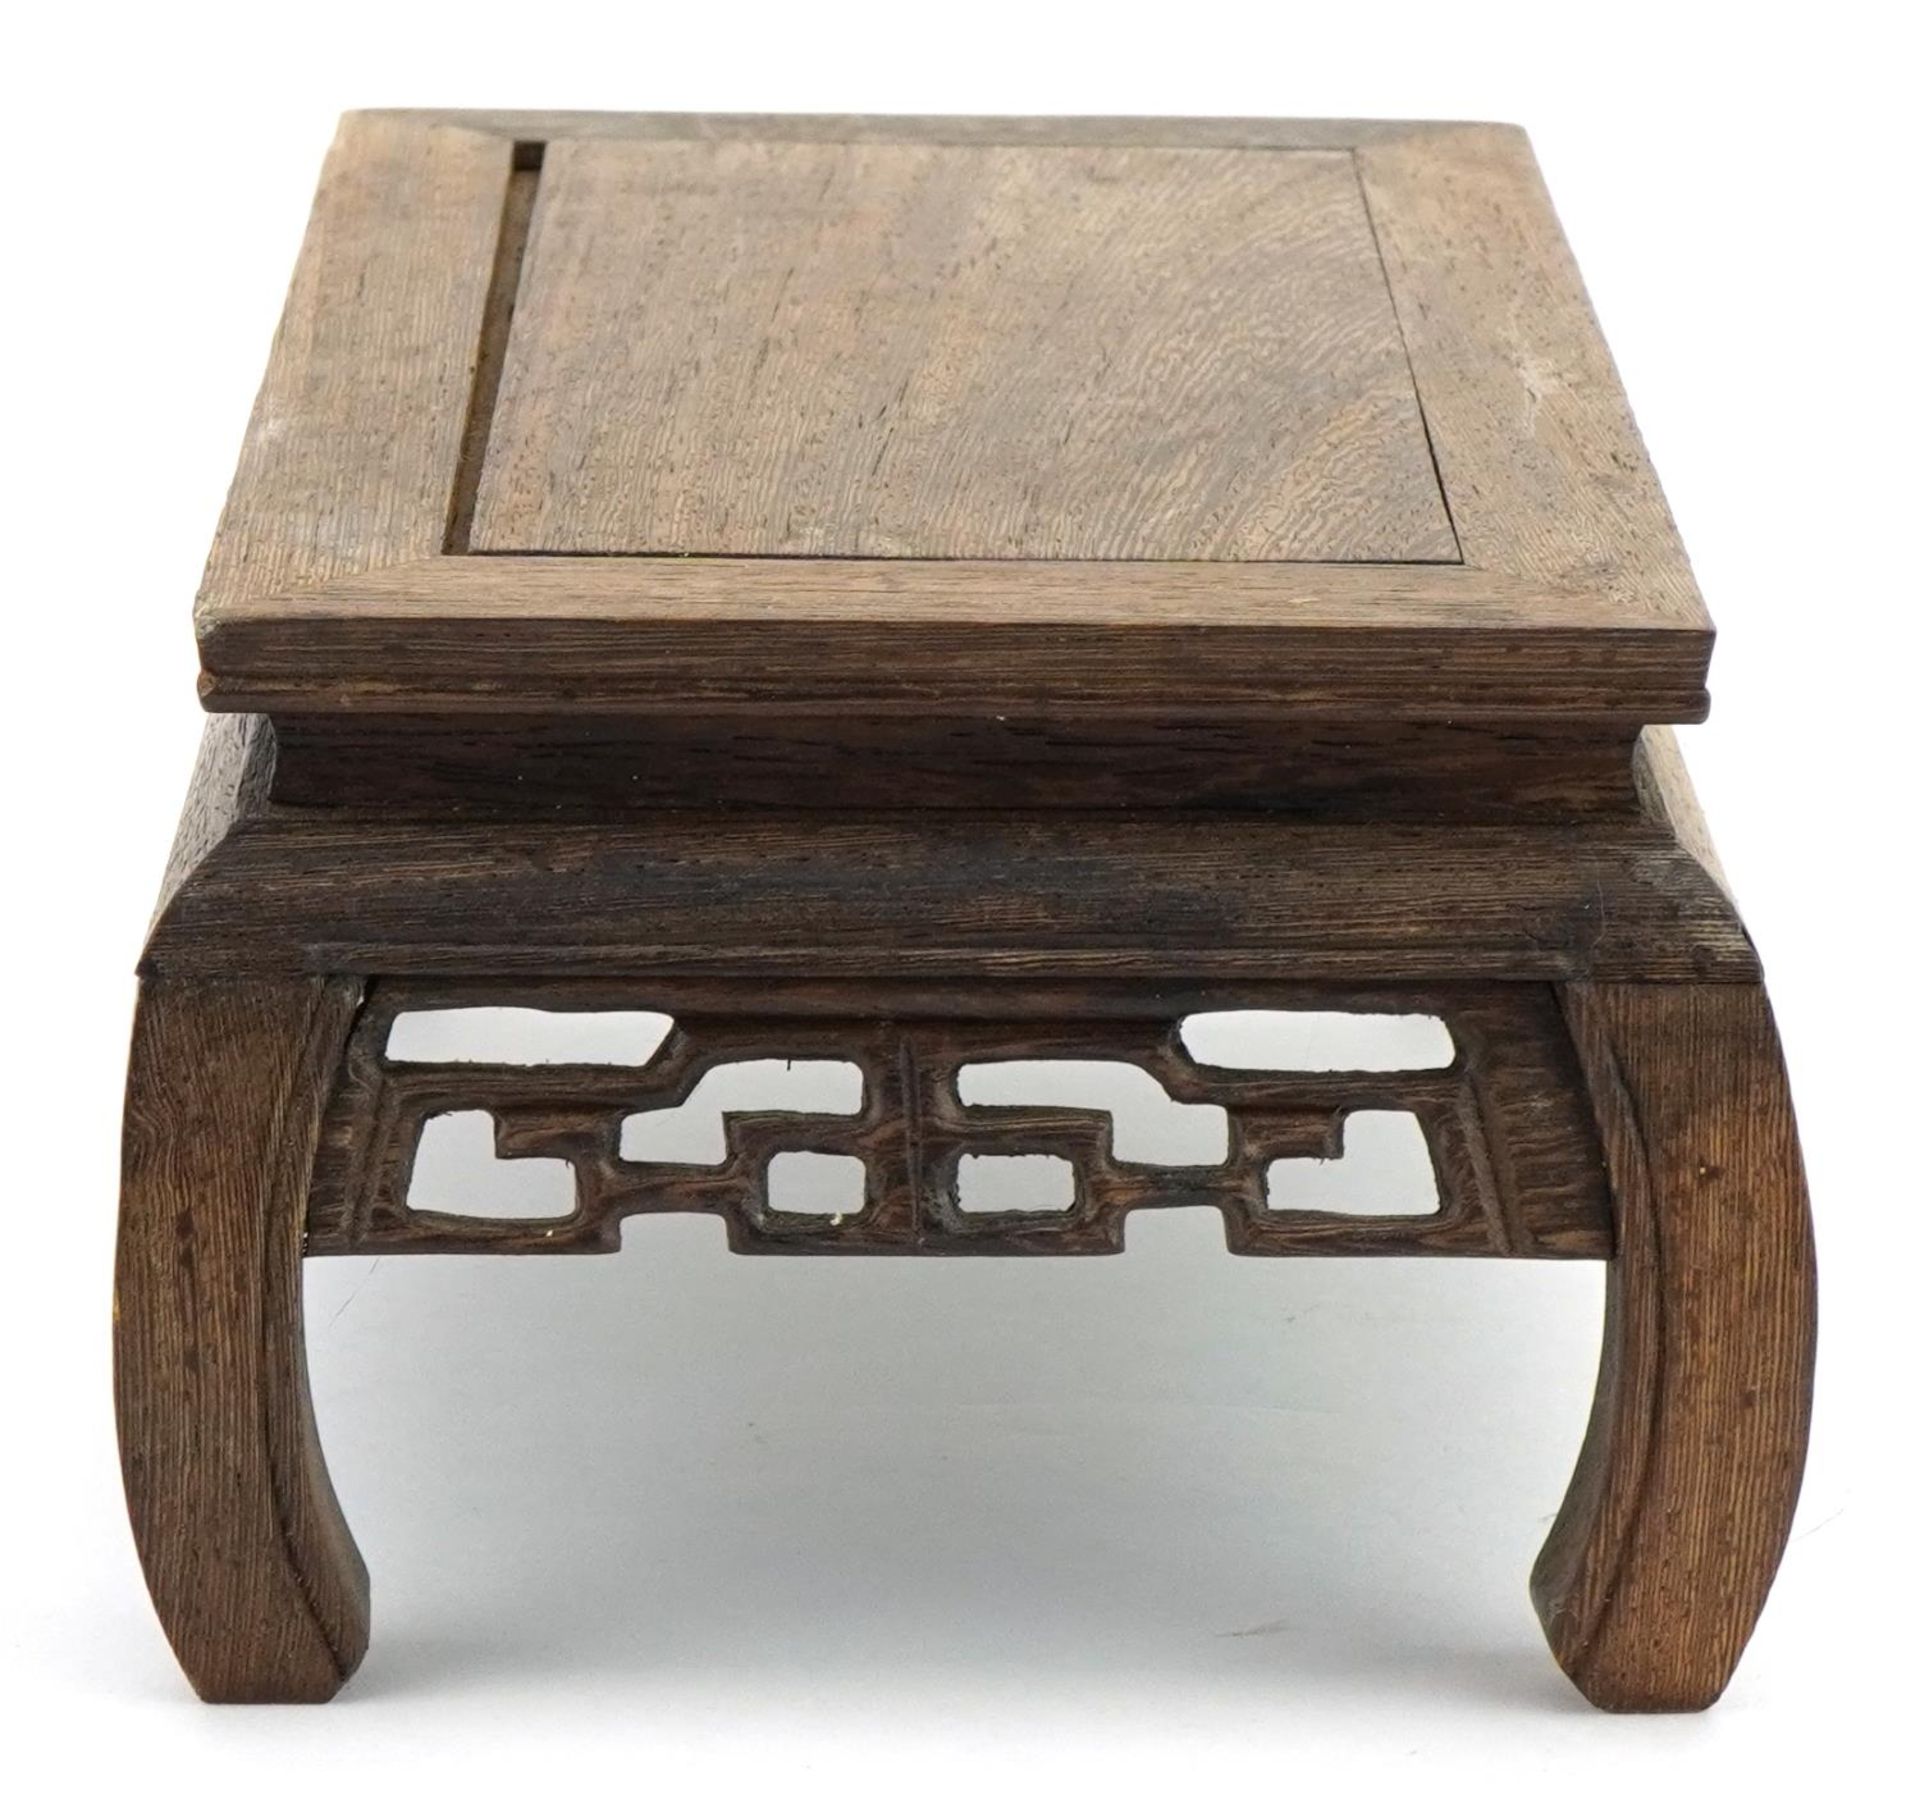 Chinese carved hardwood stand, 9.5cm H x 23.5cm W x 14.5cm D - Image 6 of 14